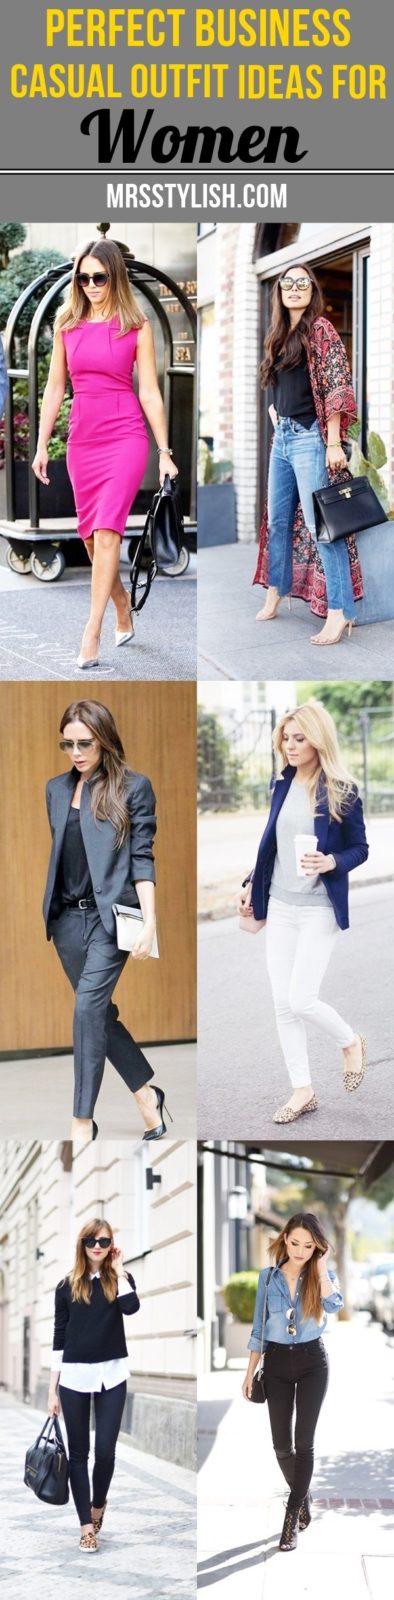 Perfect Business Casual Outfit Ideas For Women